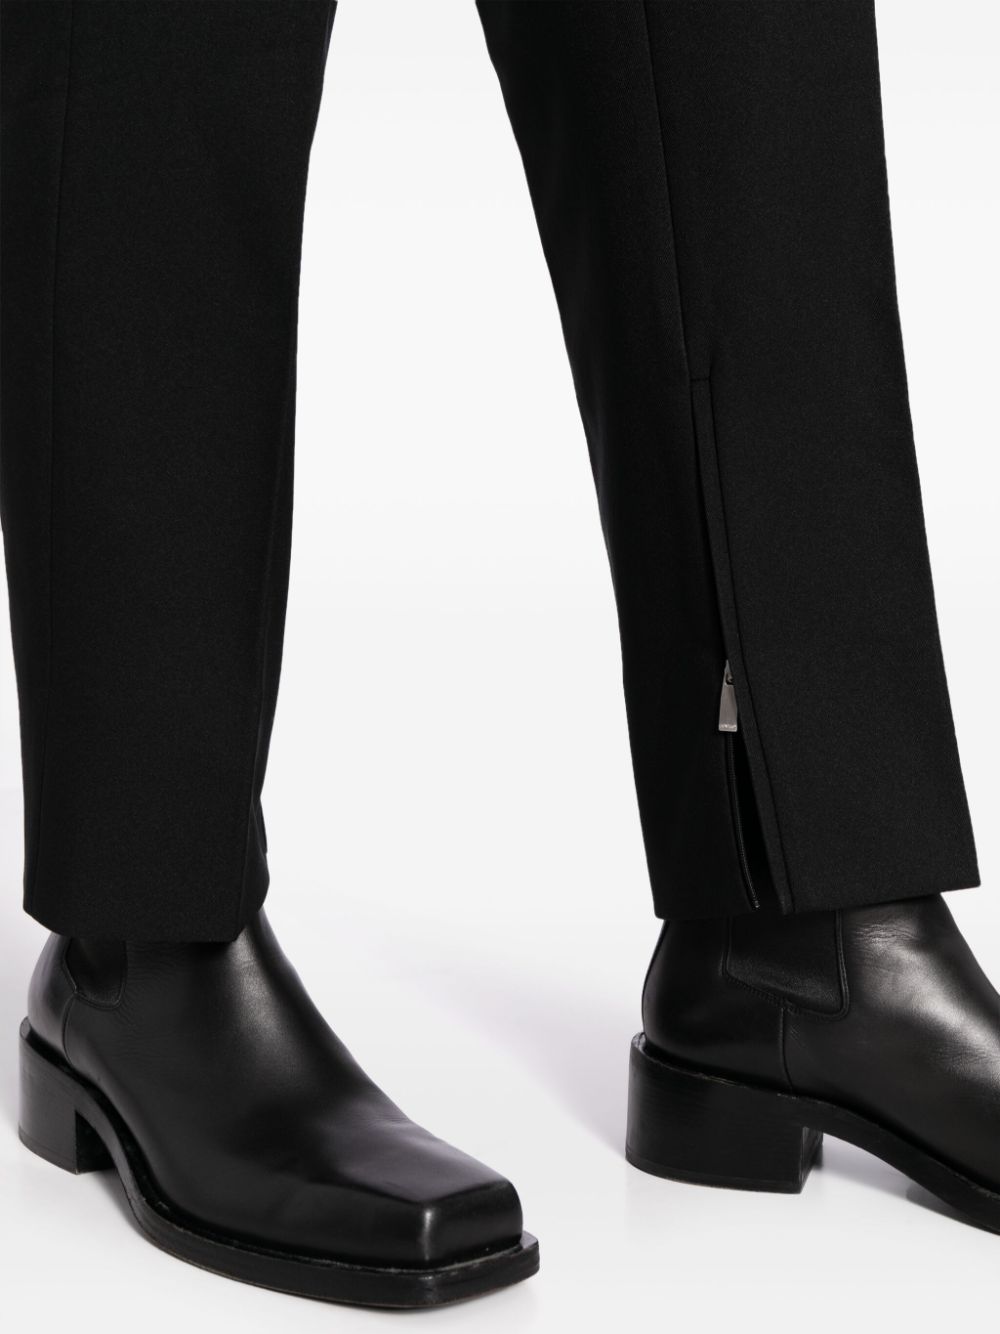 Shop Off-white Zip-detail Cotton Tailored Trousers In Black